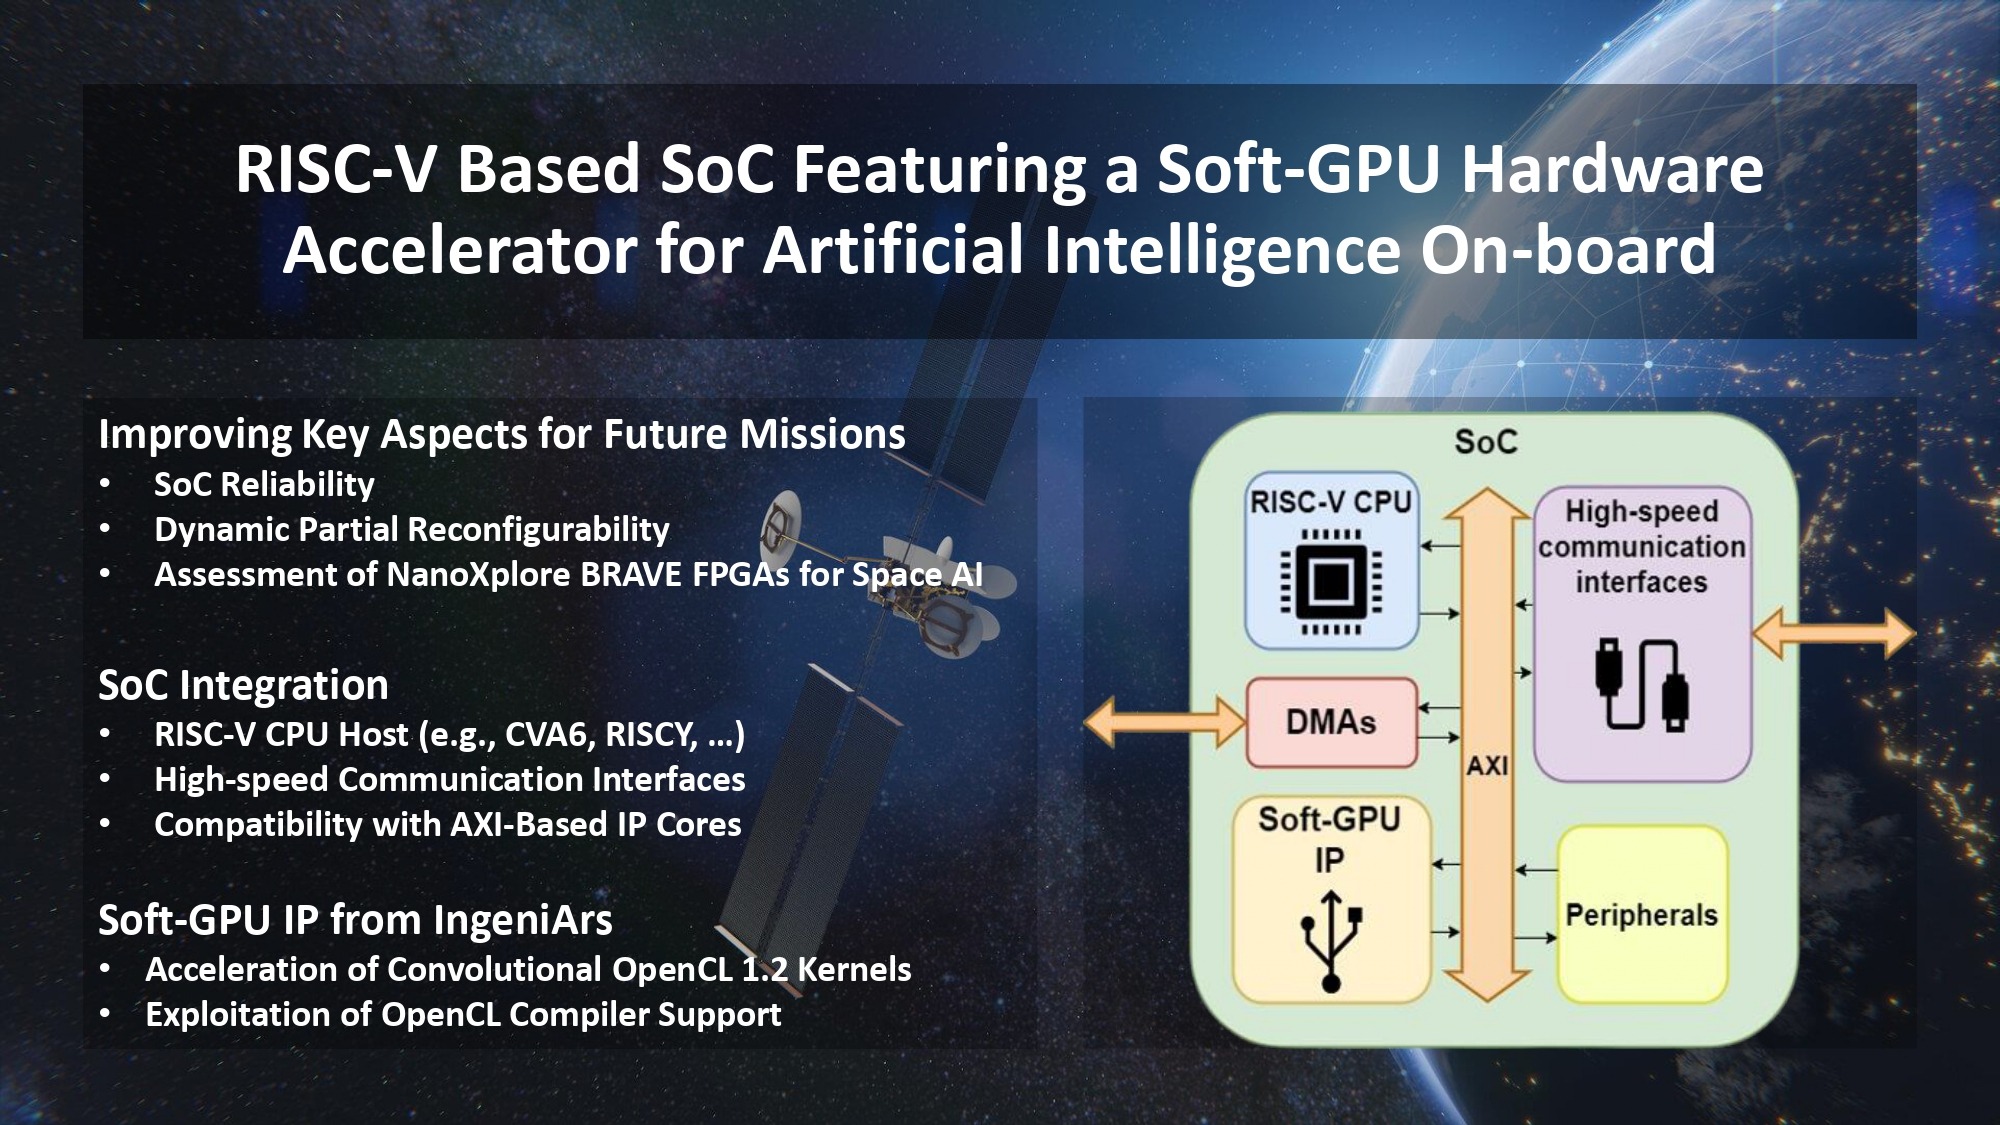 RISC-V Based SoC Featuring a Soft-GPU Hardware Accelerator for Artificial Intelligence On-board